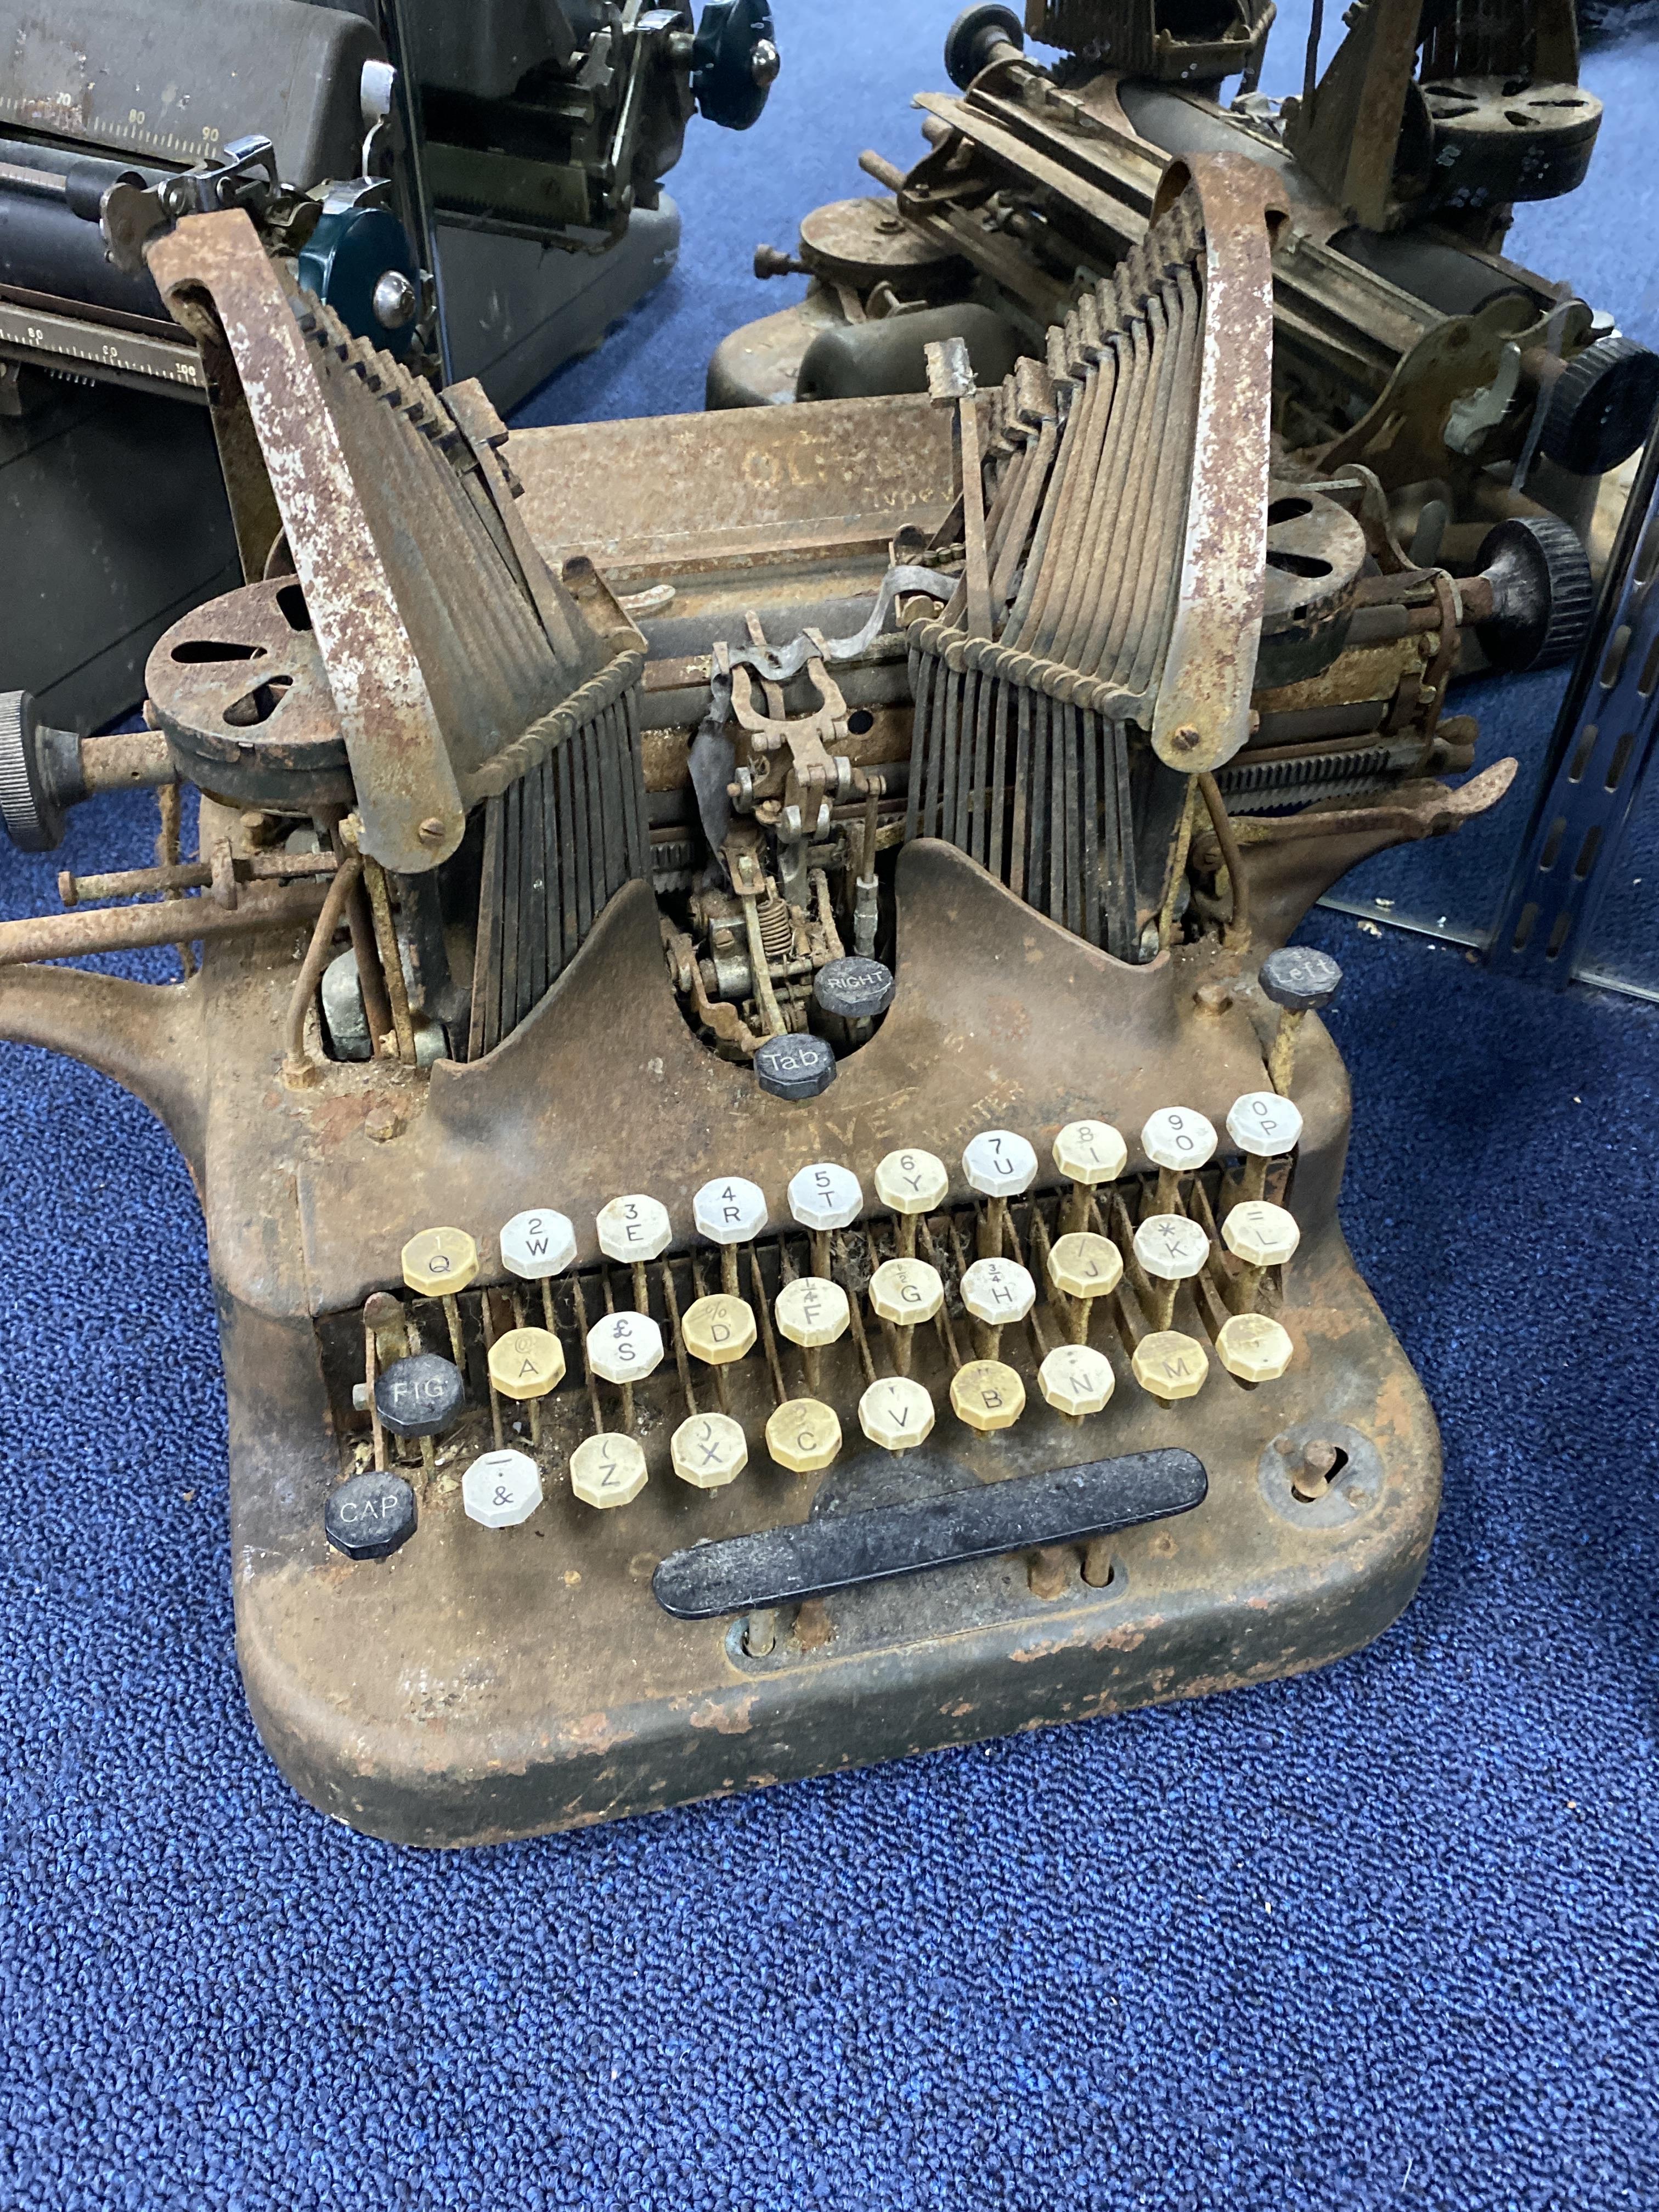 A VINTAGE REMINGTON TYPEWRITER AND ANOTHER - Image 2 of 2